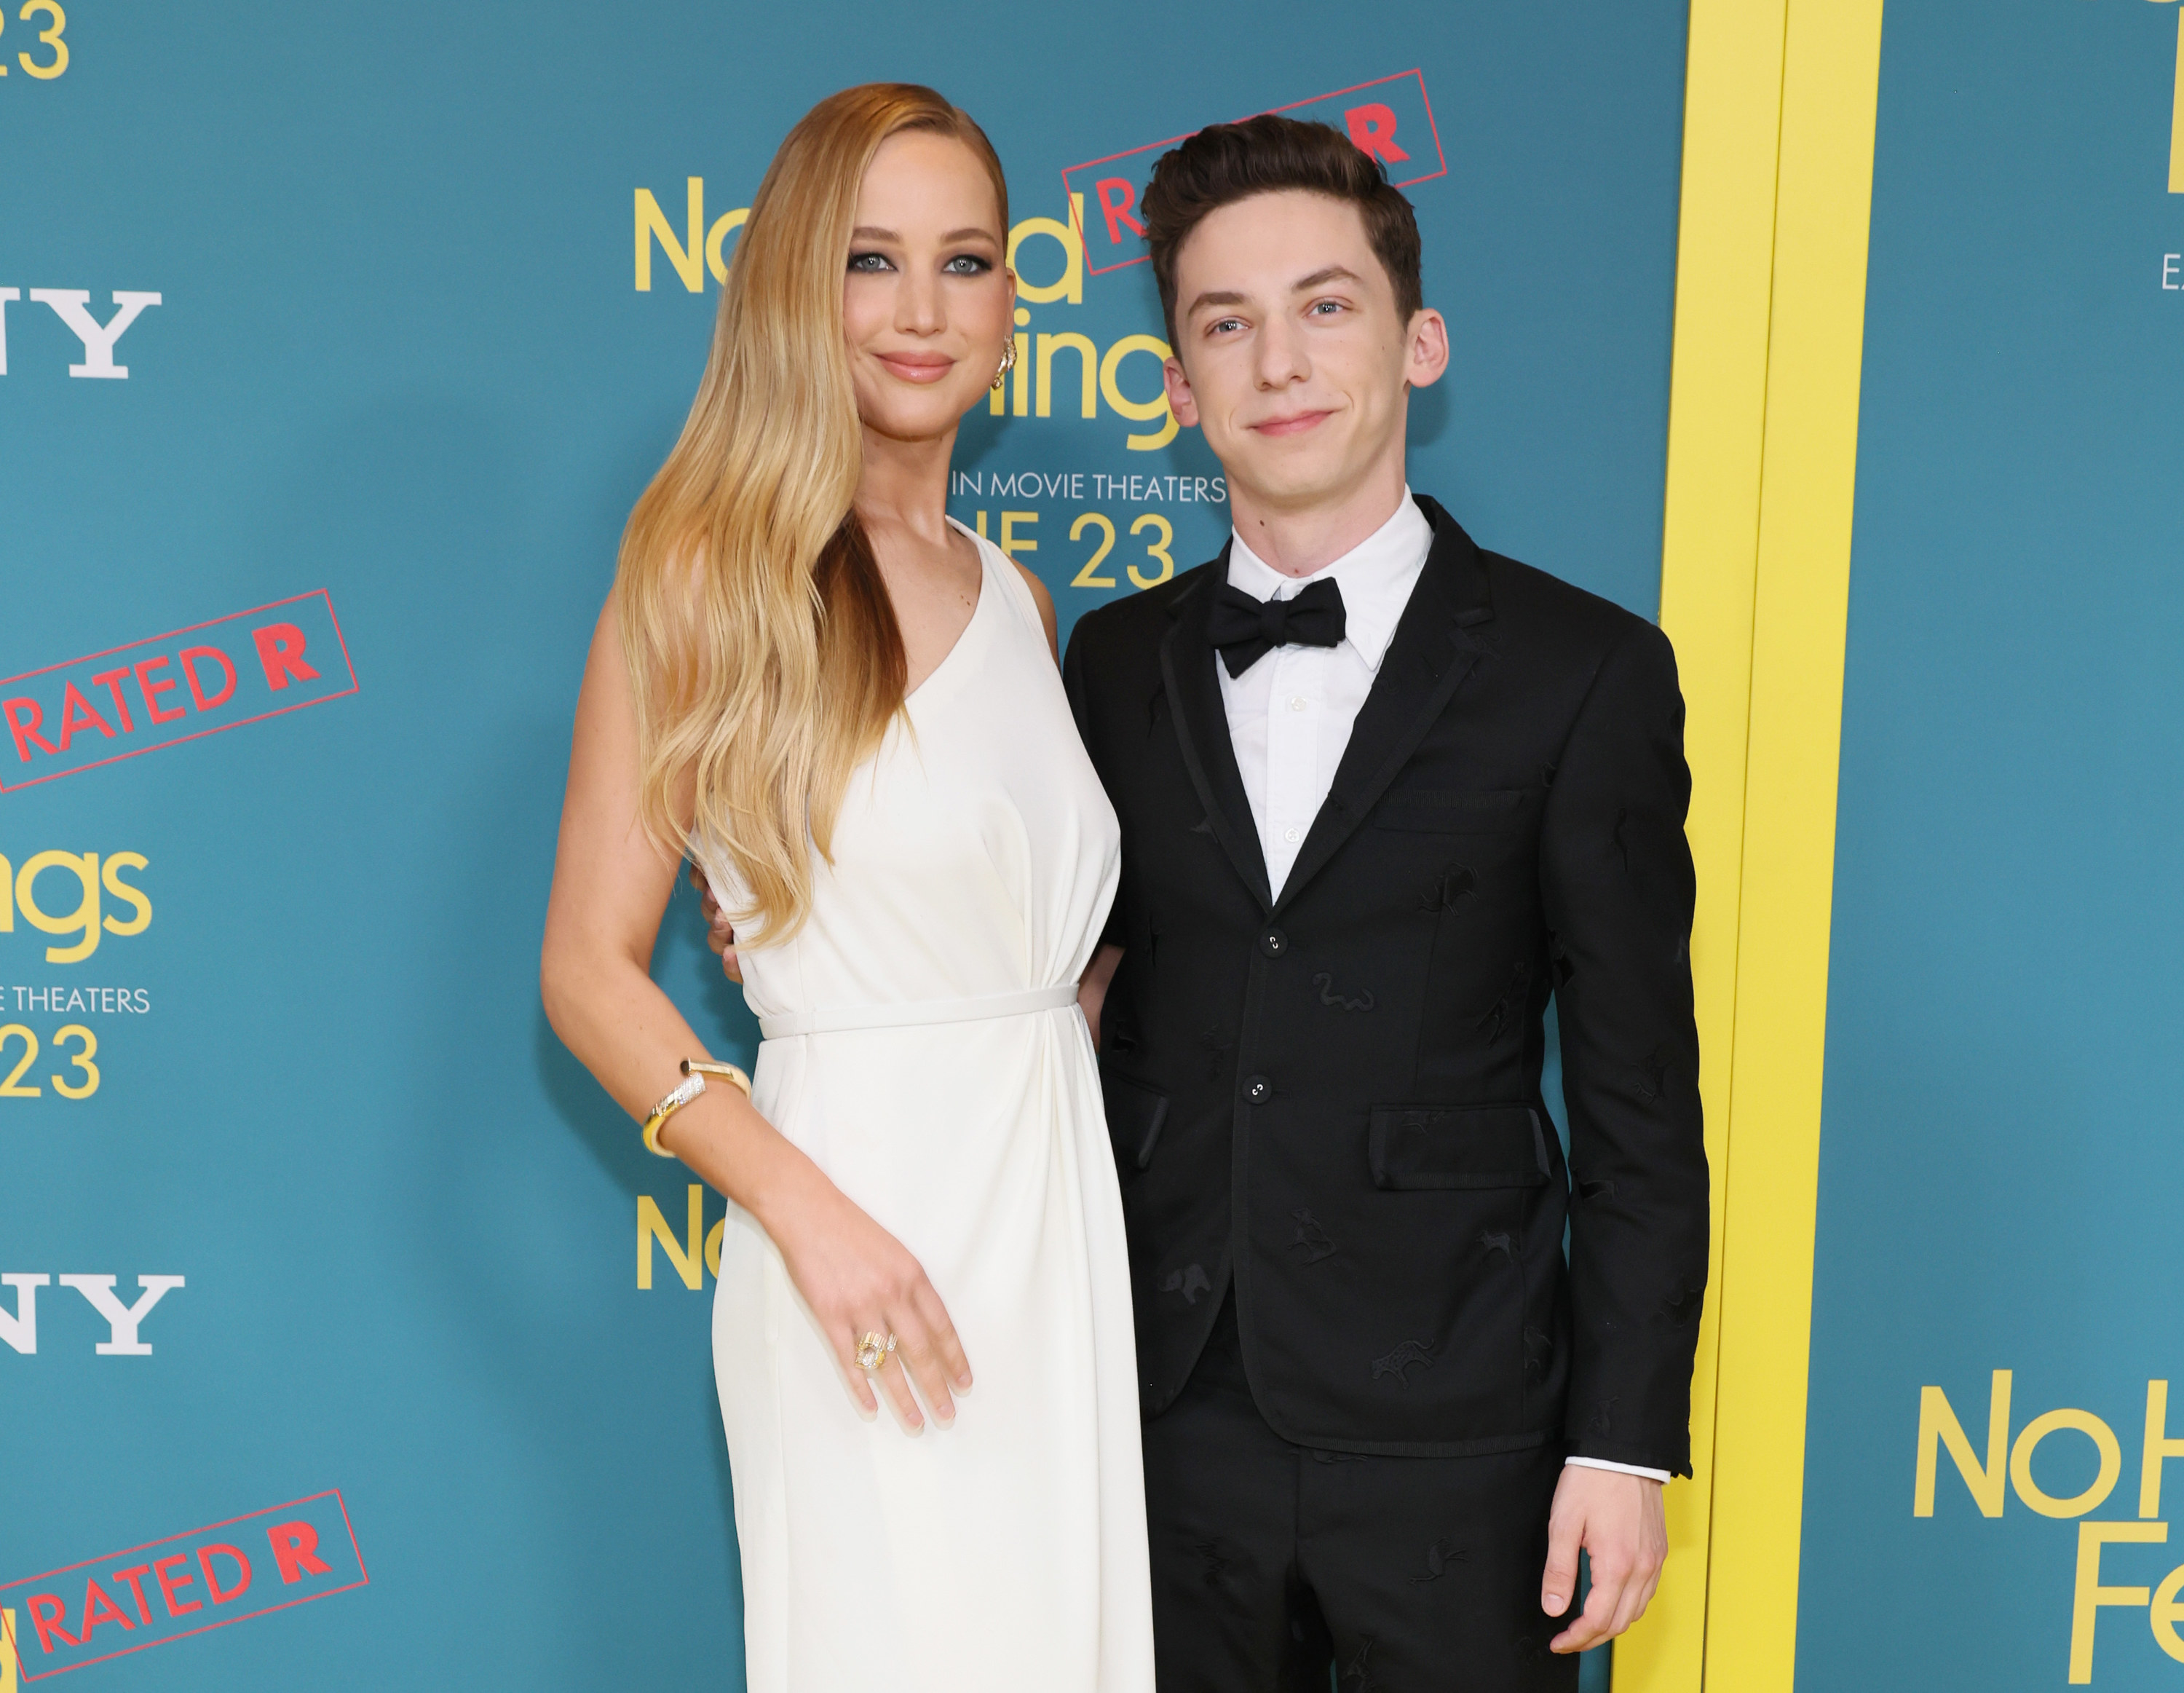 Close-up of Jennifer, in a sleeveless dress, and Andrew, in a suit and bow tie, at a media event